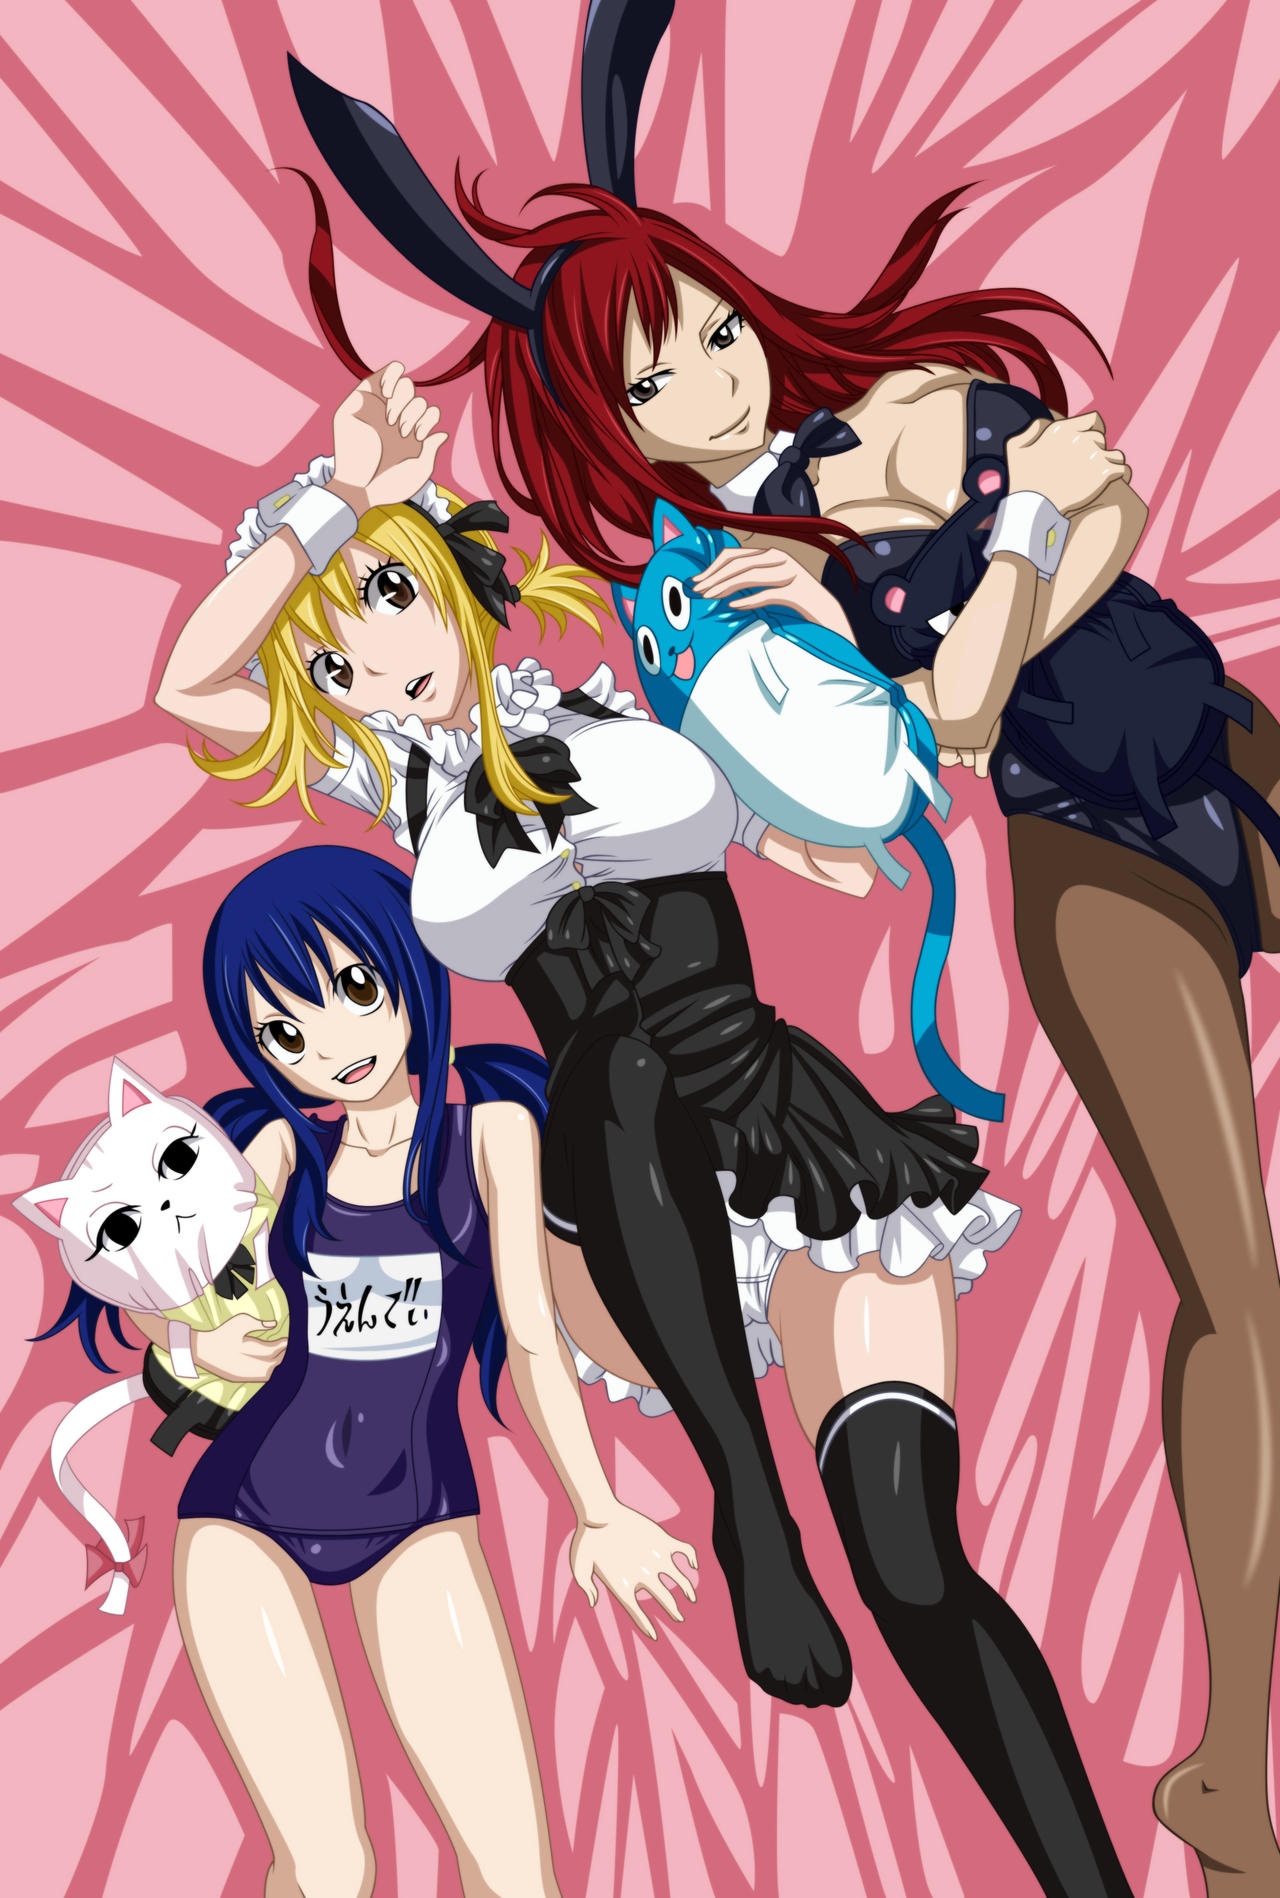 Fan Fairy Tail Erza Anime Ray99 Ft Deviantart Lucy Babes Heartfilia Wendy S...